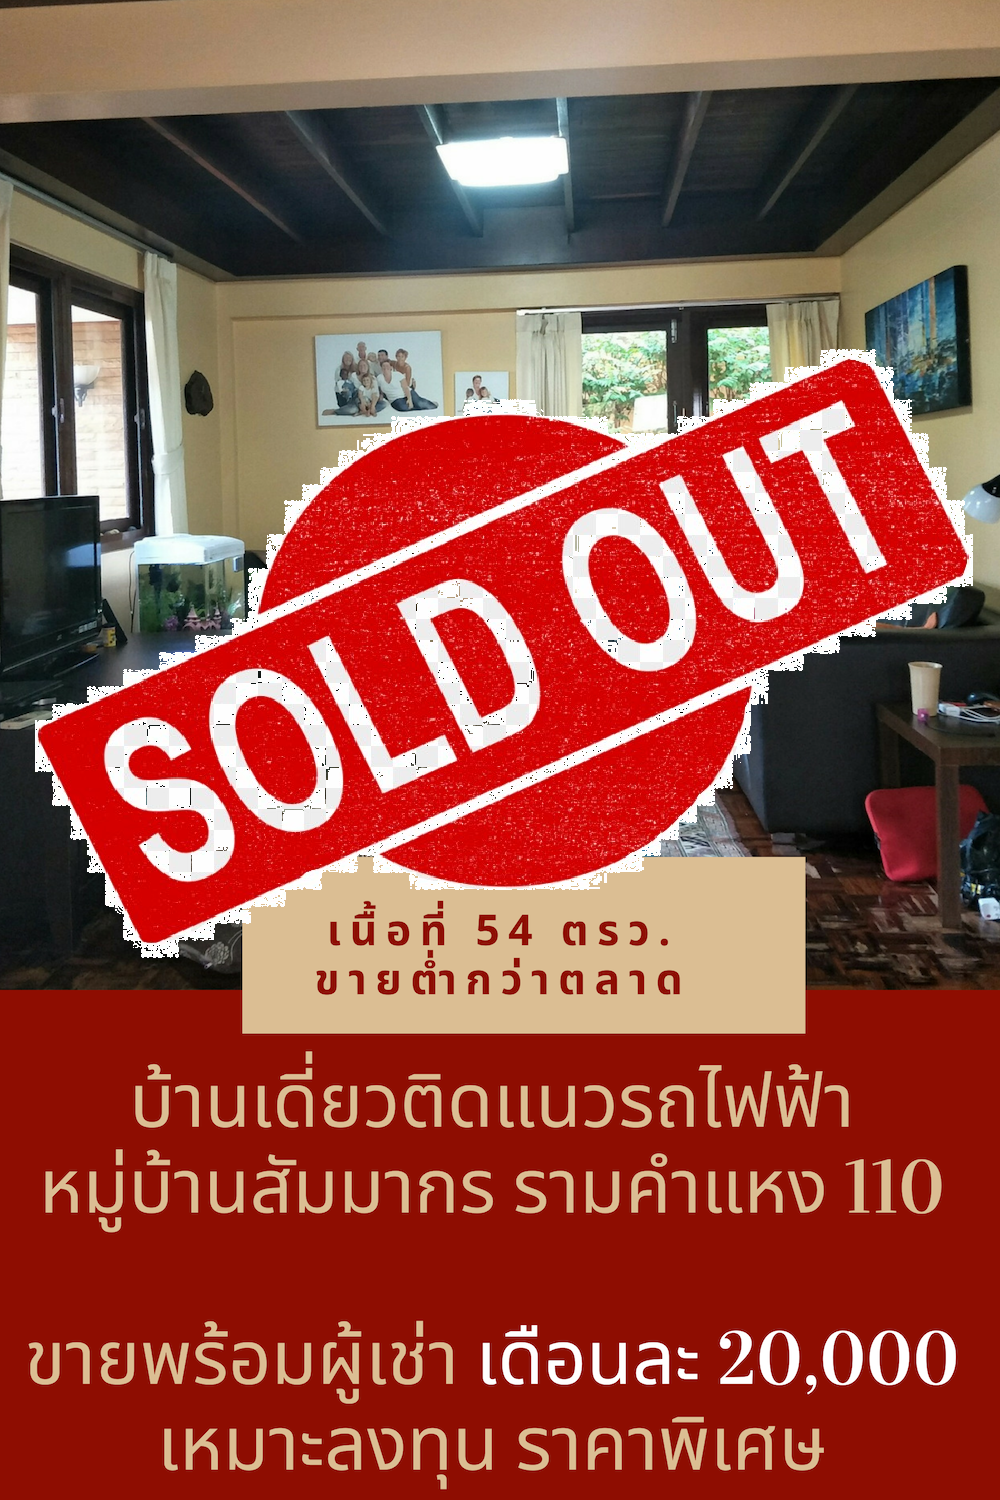 Sold Out House for sale with tenant in Sammakorn Village, Ramkhamhaeng 110, 54 square wah. Special price.